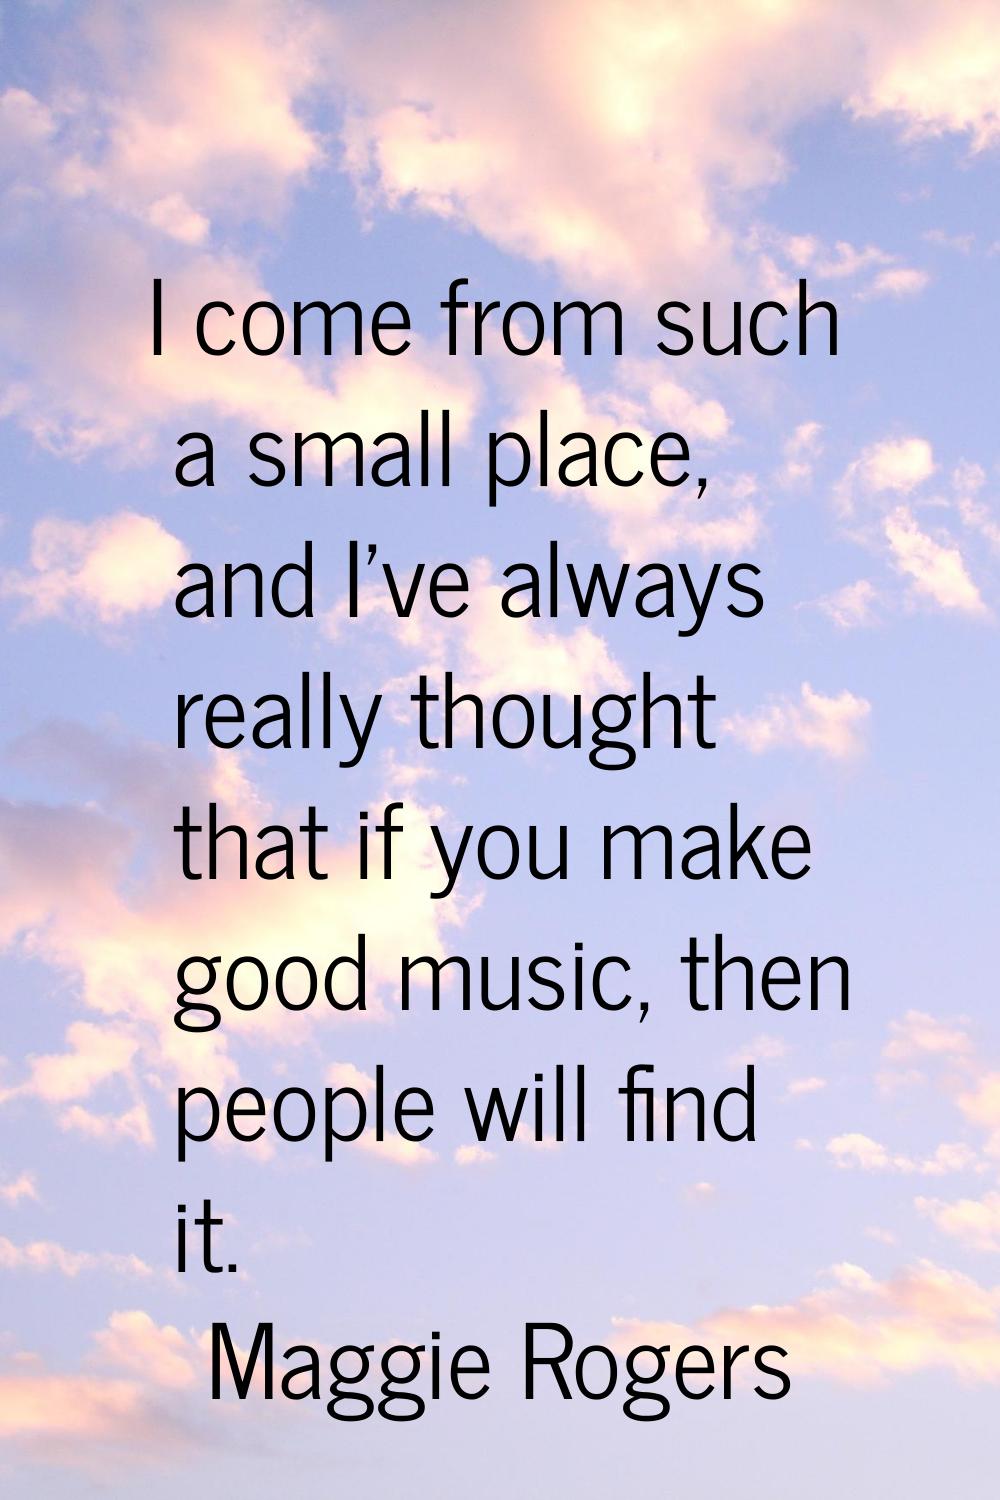 I come from such a small place, and I've always really thought that if you make good music, then pe